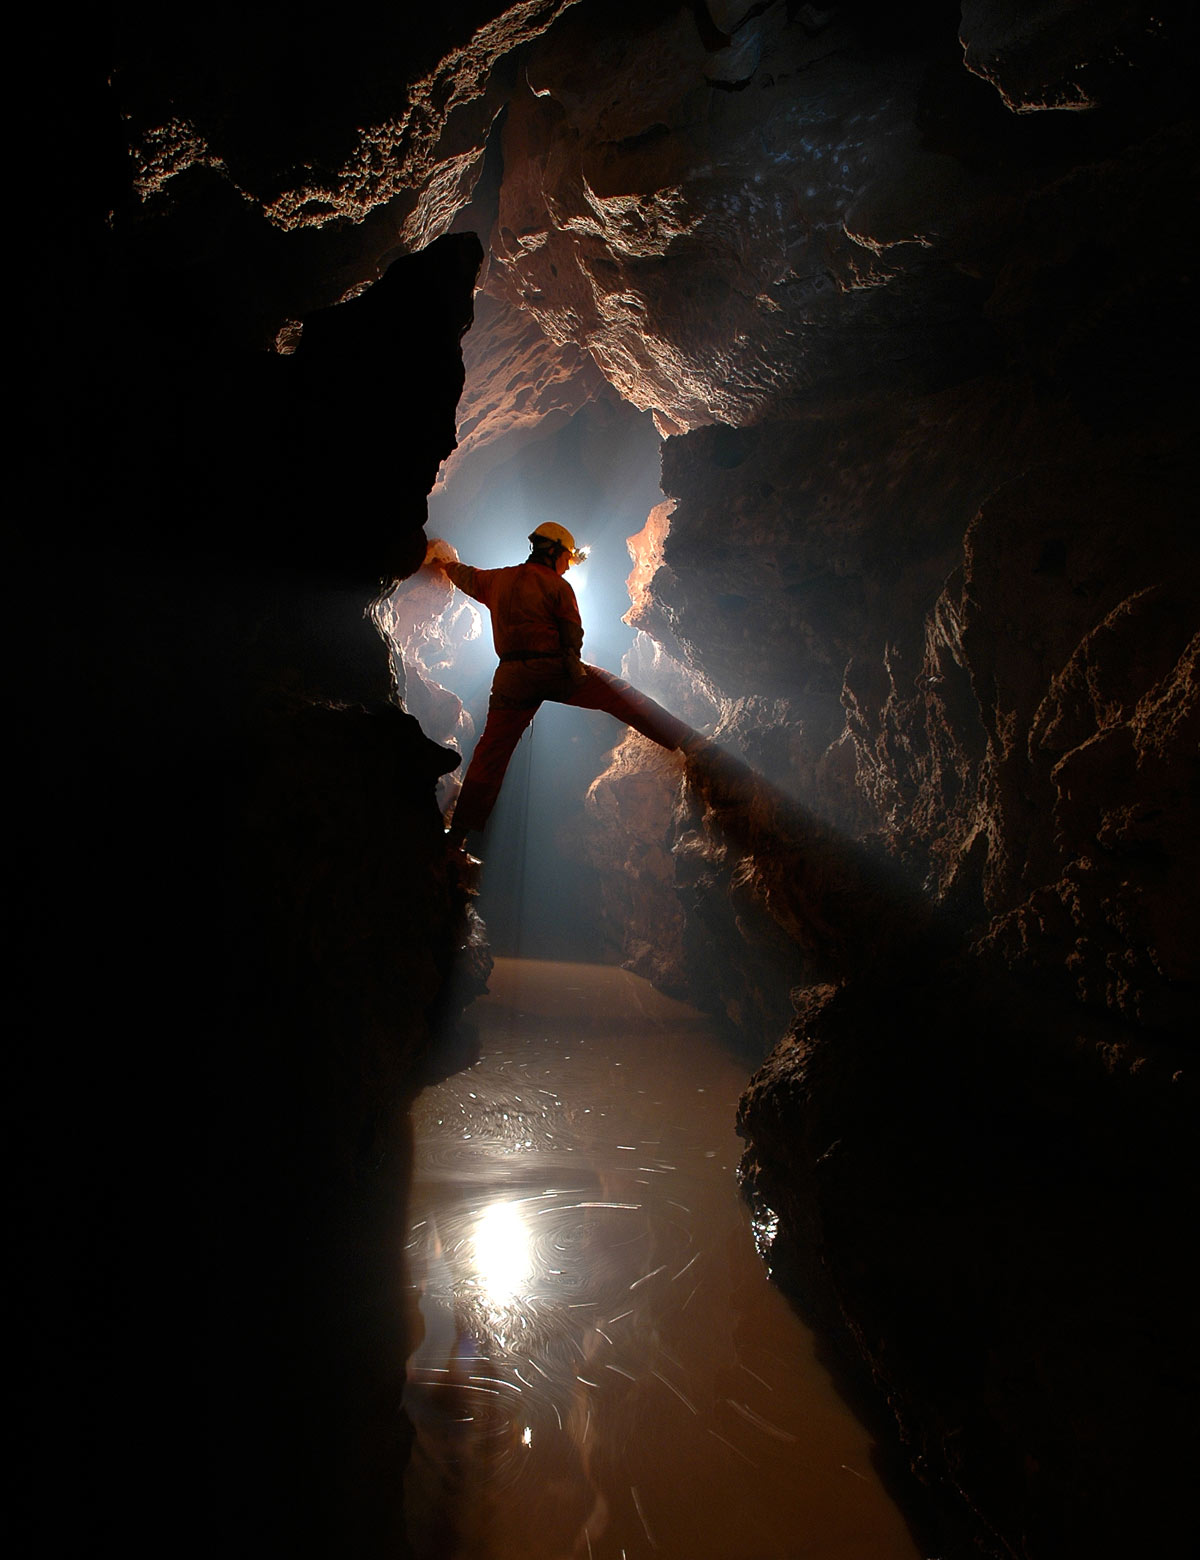 Caver straddling an underground stream in a narrow cave passage, backlighting for effect.